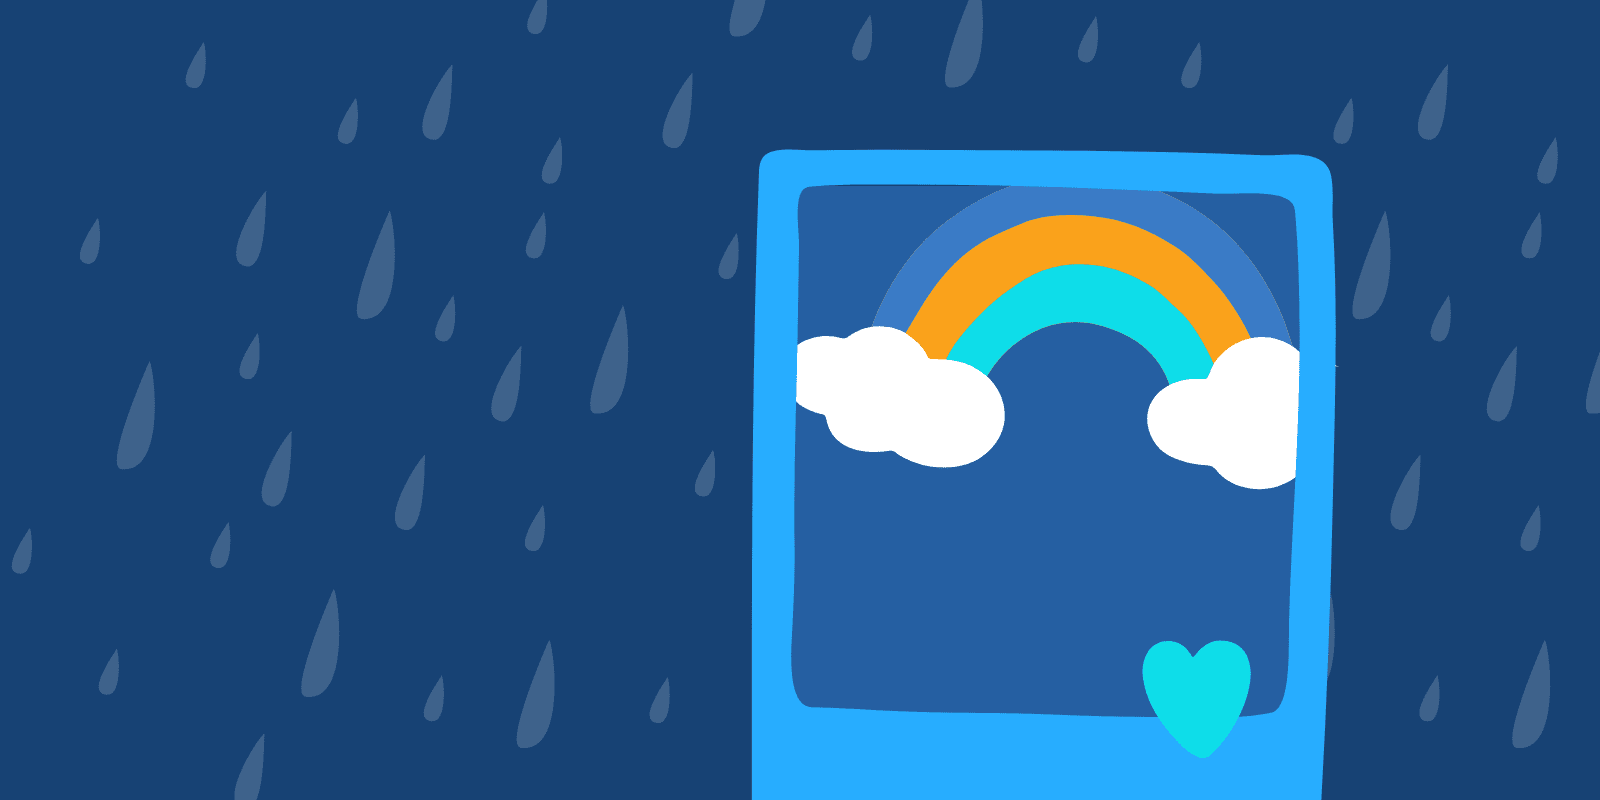 A rainbow graphic inside a photo frame on top of rainy background